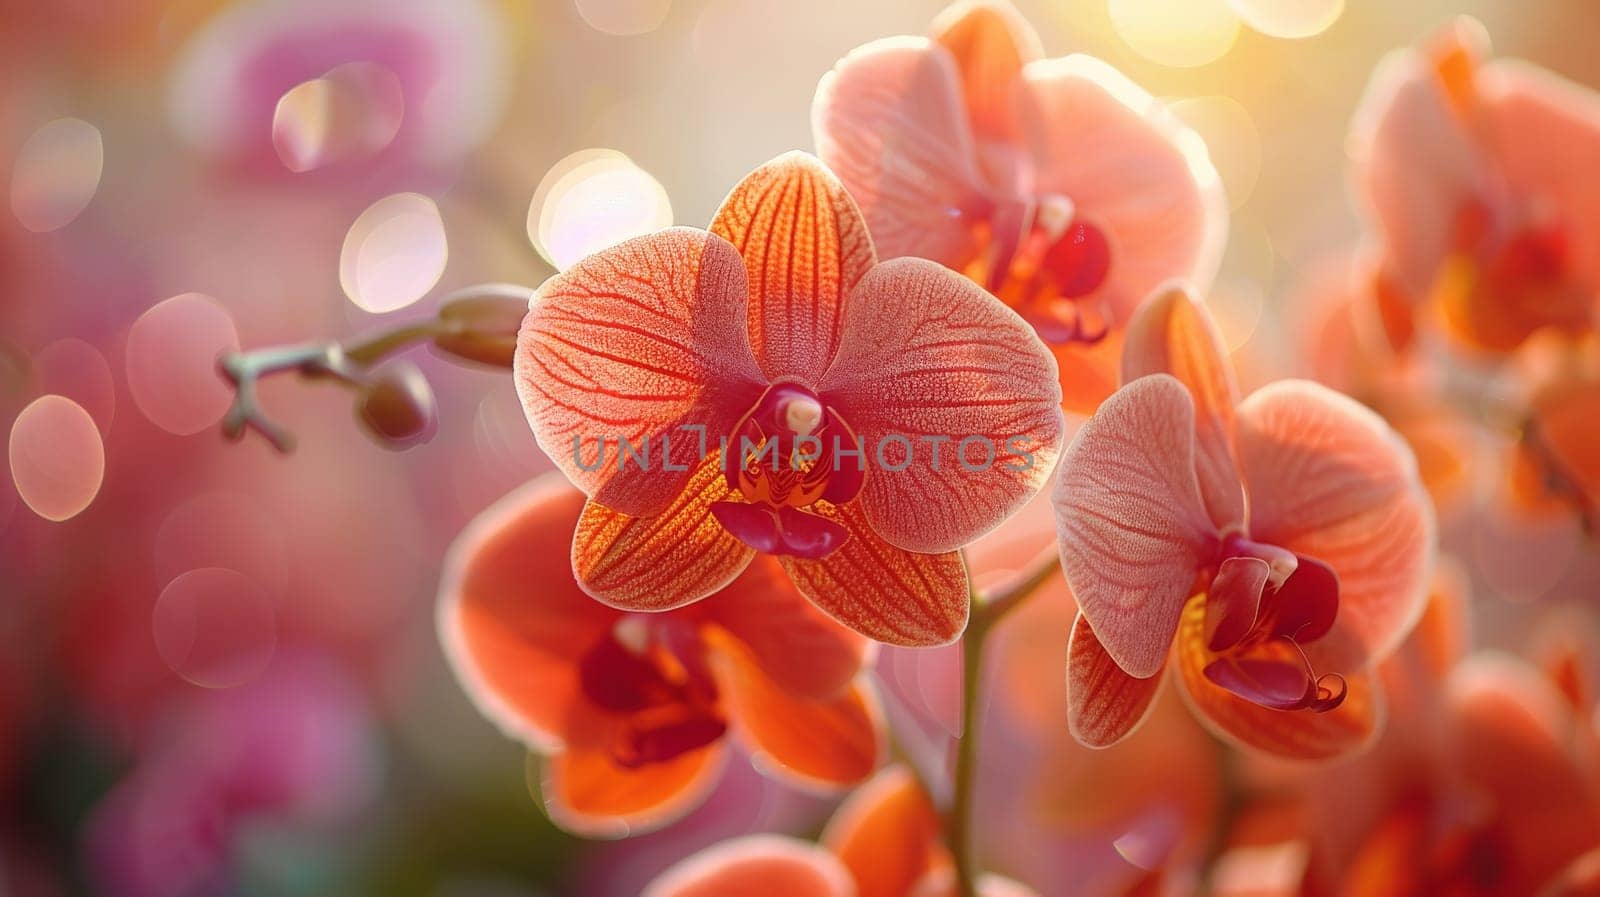 A bunch of orange flowers with a blurry background by itchaznong